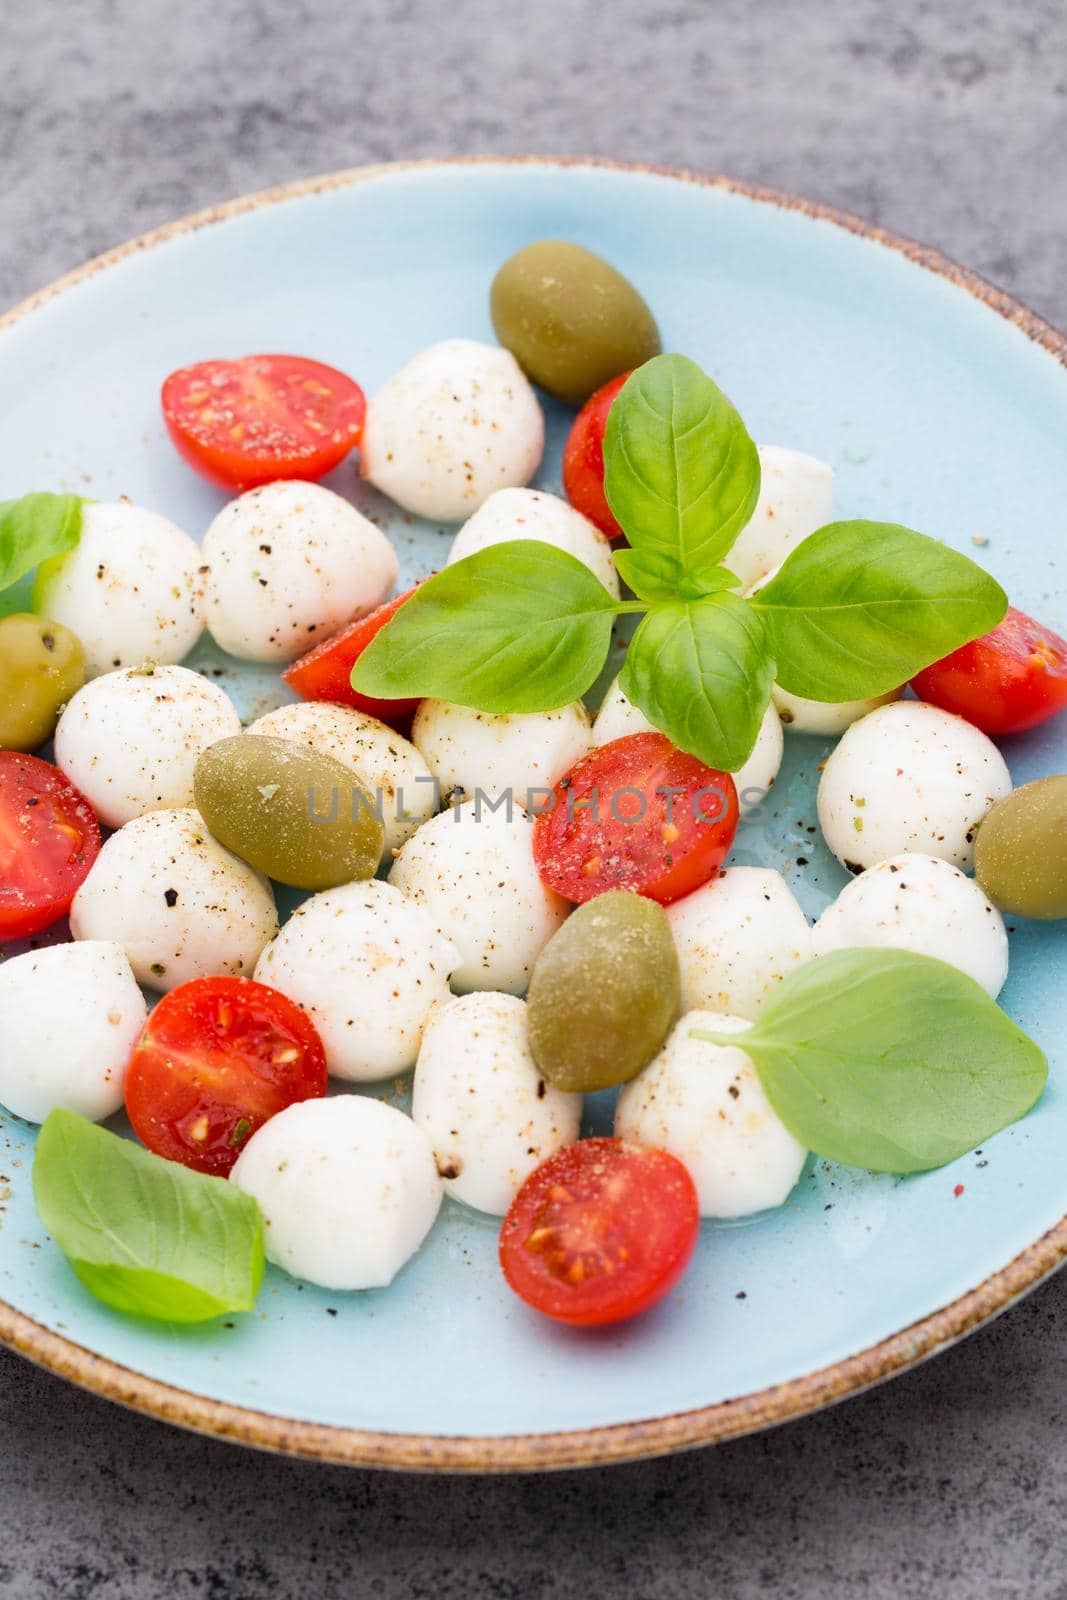 Delicious caprese salad with ripe cherry tomatoes and mini mozzarella cheese balls with fresh basil leaves. by gitusik